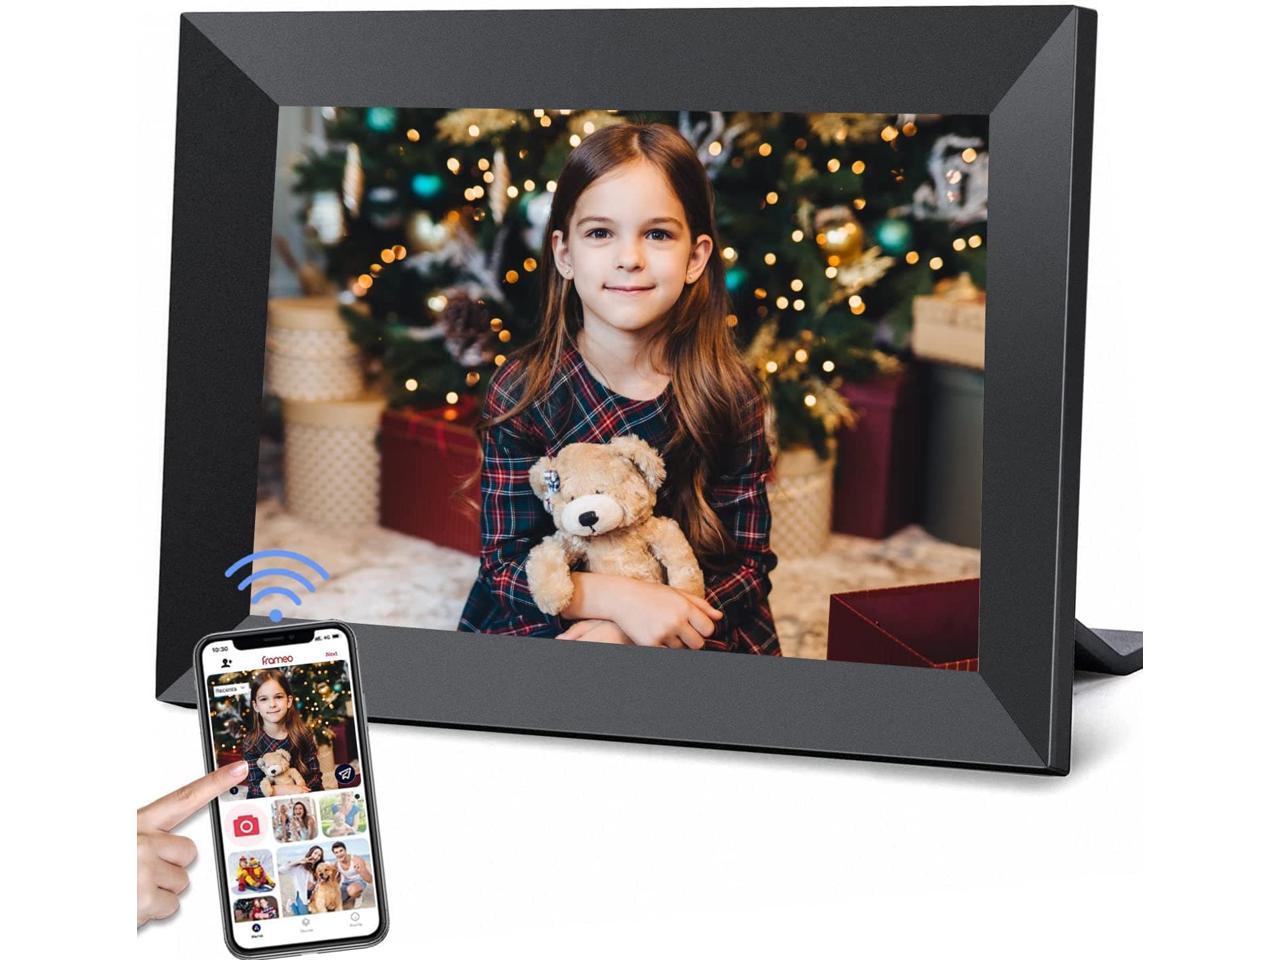 10.1 Inch WiFi Picture Frame Digital Picture Frame 10.1 Inch WiFi Photo Frame 16 GB Storage Mobile Phone Send Pictures with Frameo APP Large Touch Screen HD Display,Micro-SD Support Gift for Mon Dad Family 